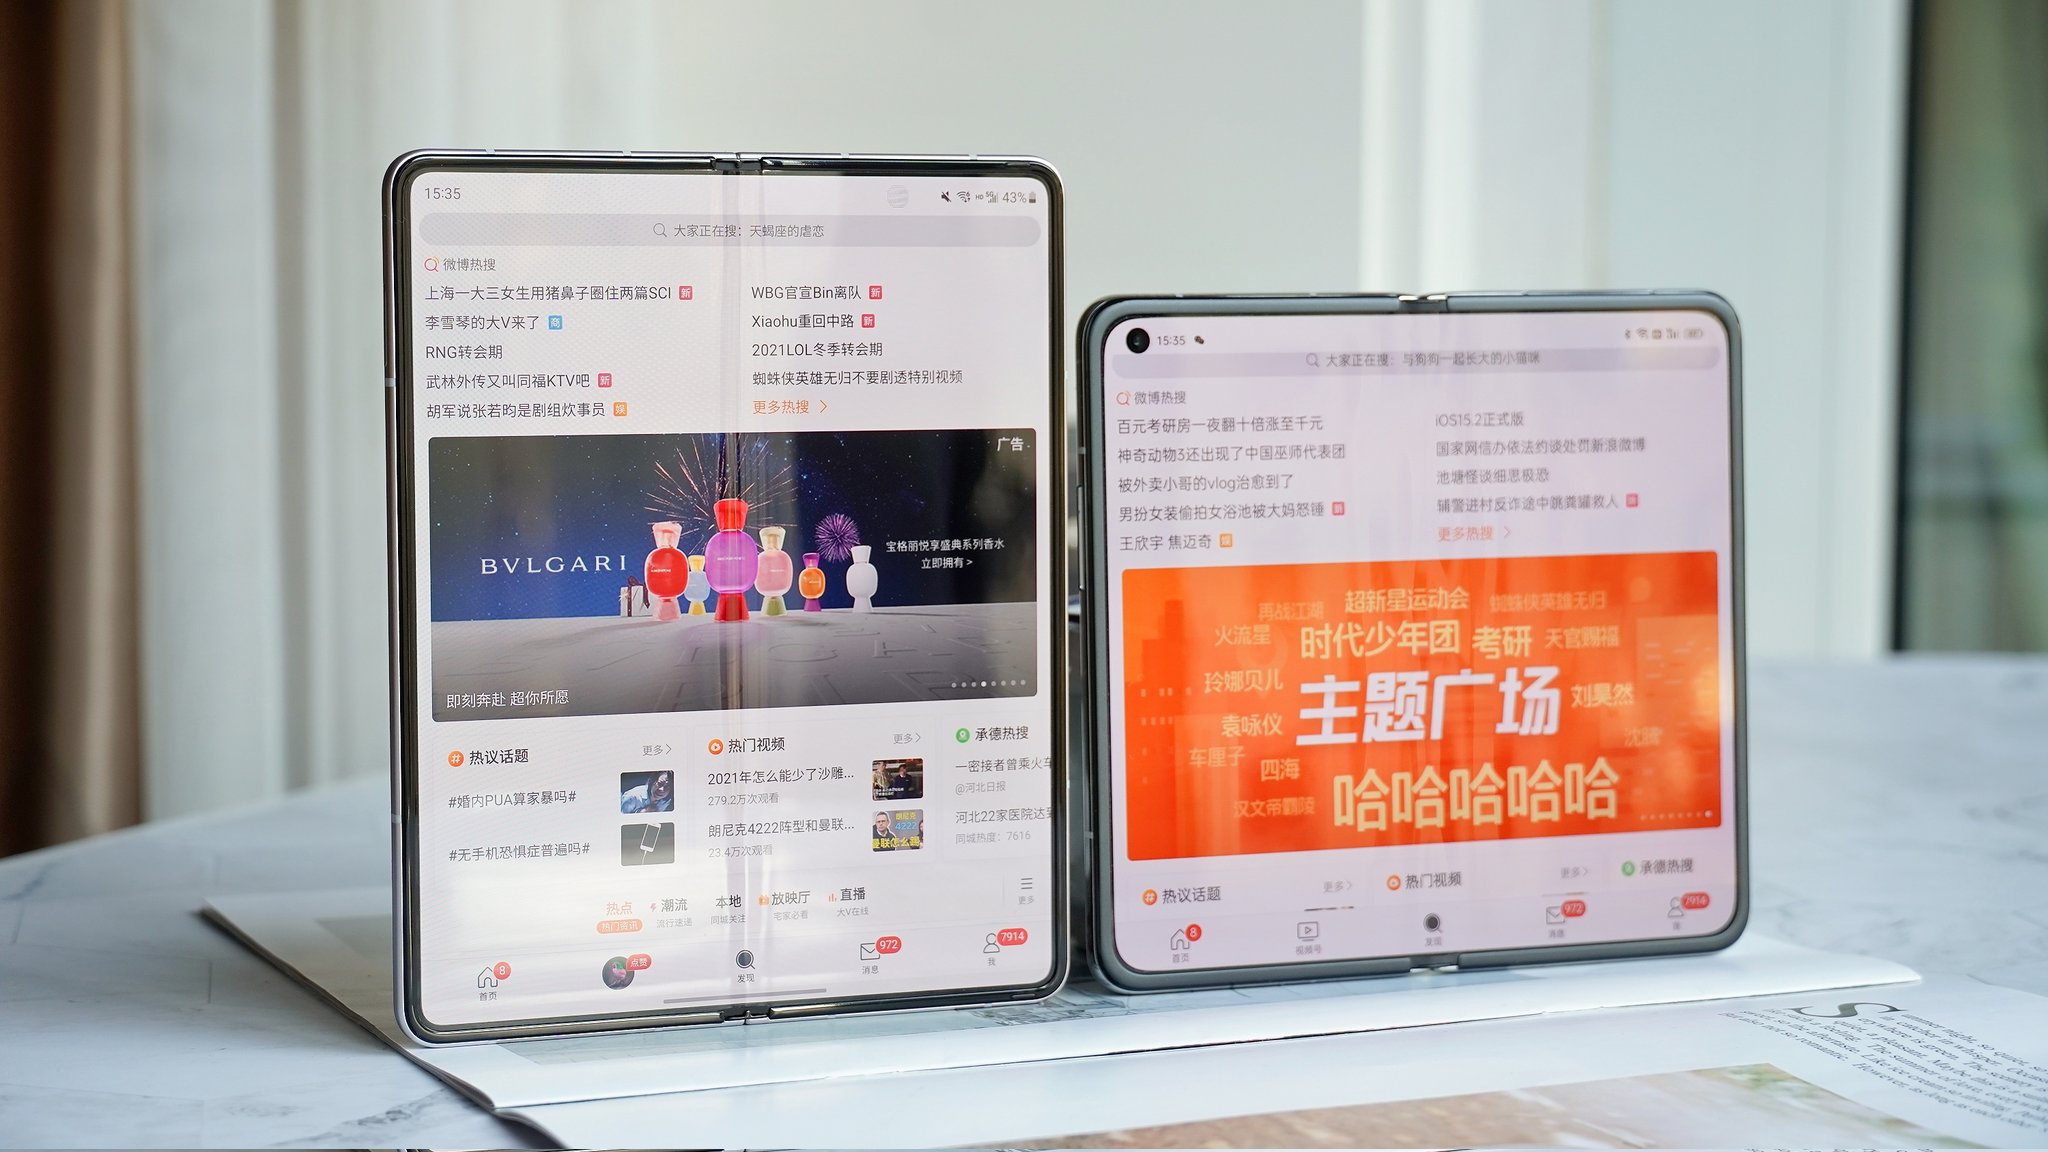 An image of the Samsung Galaxy Z Fold 3 (left) and Oppo Find N, comparing the two phones' displays when unfolded